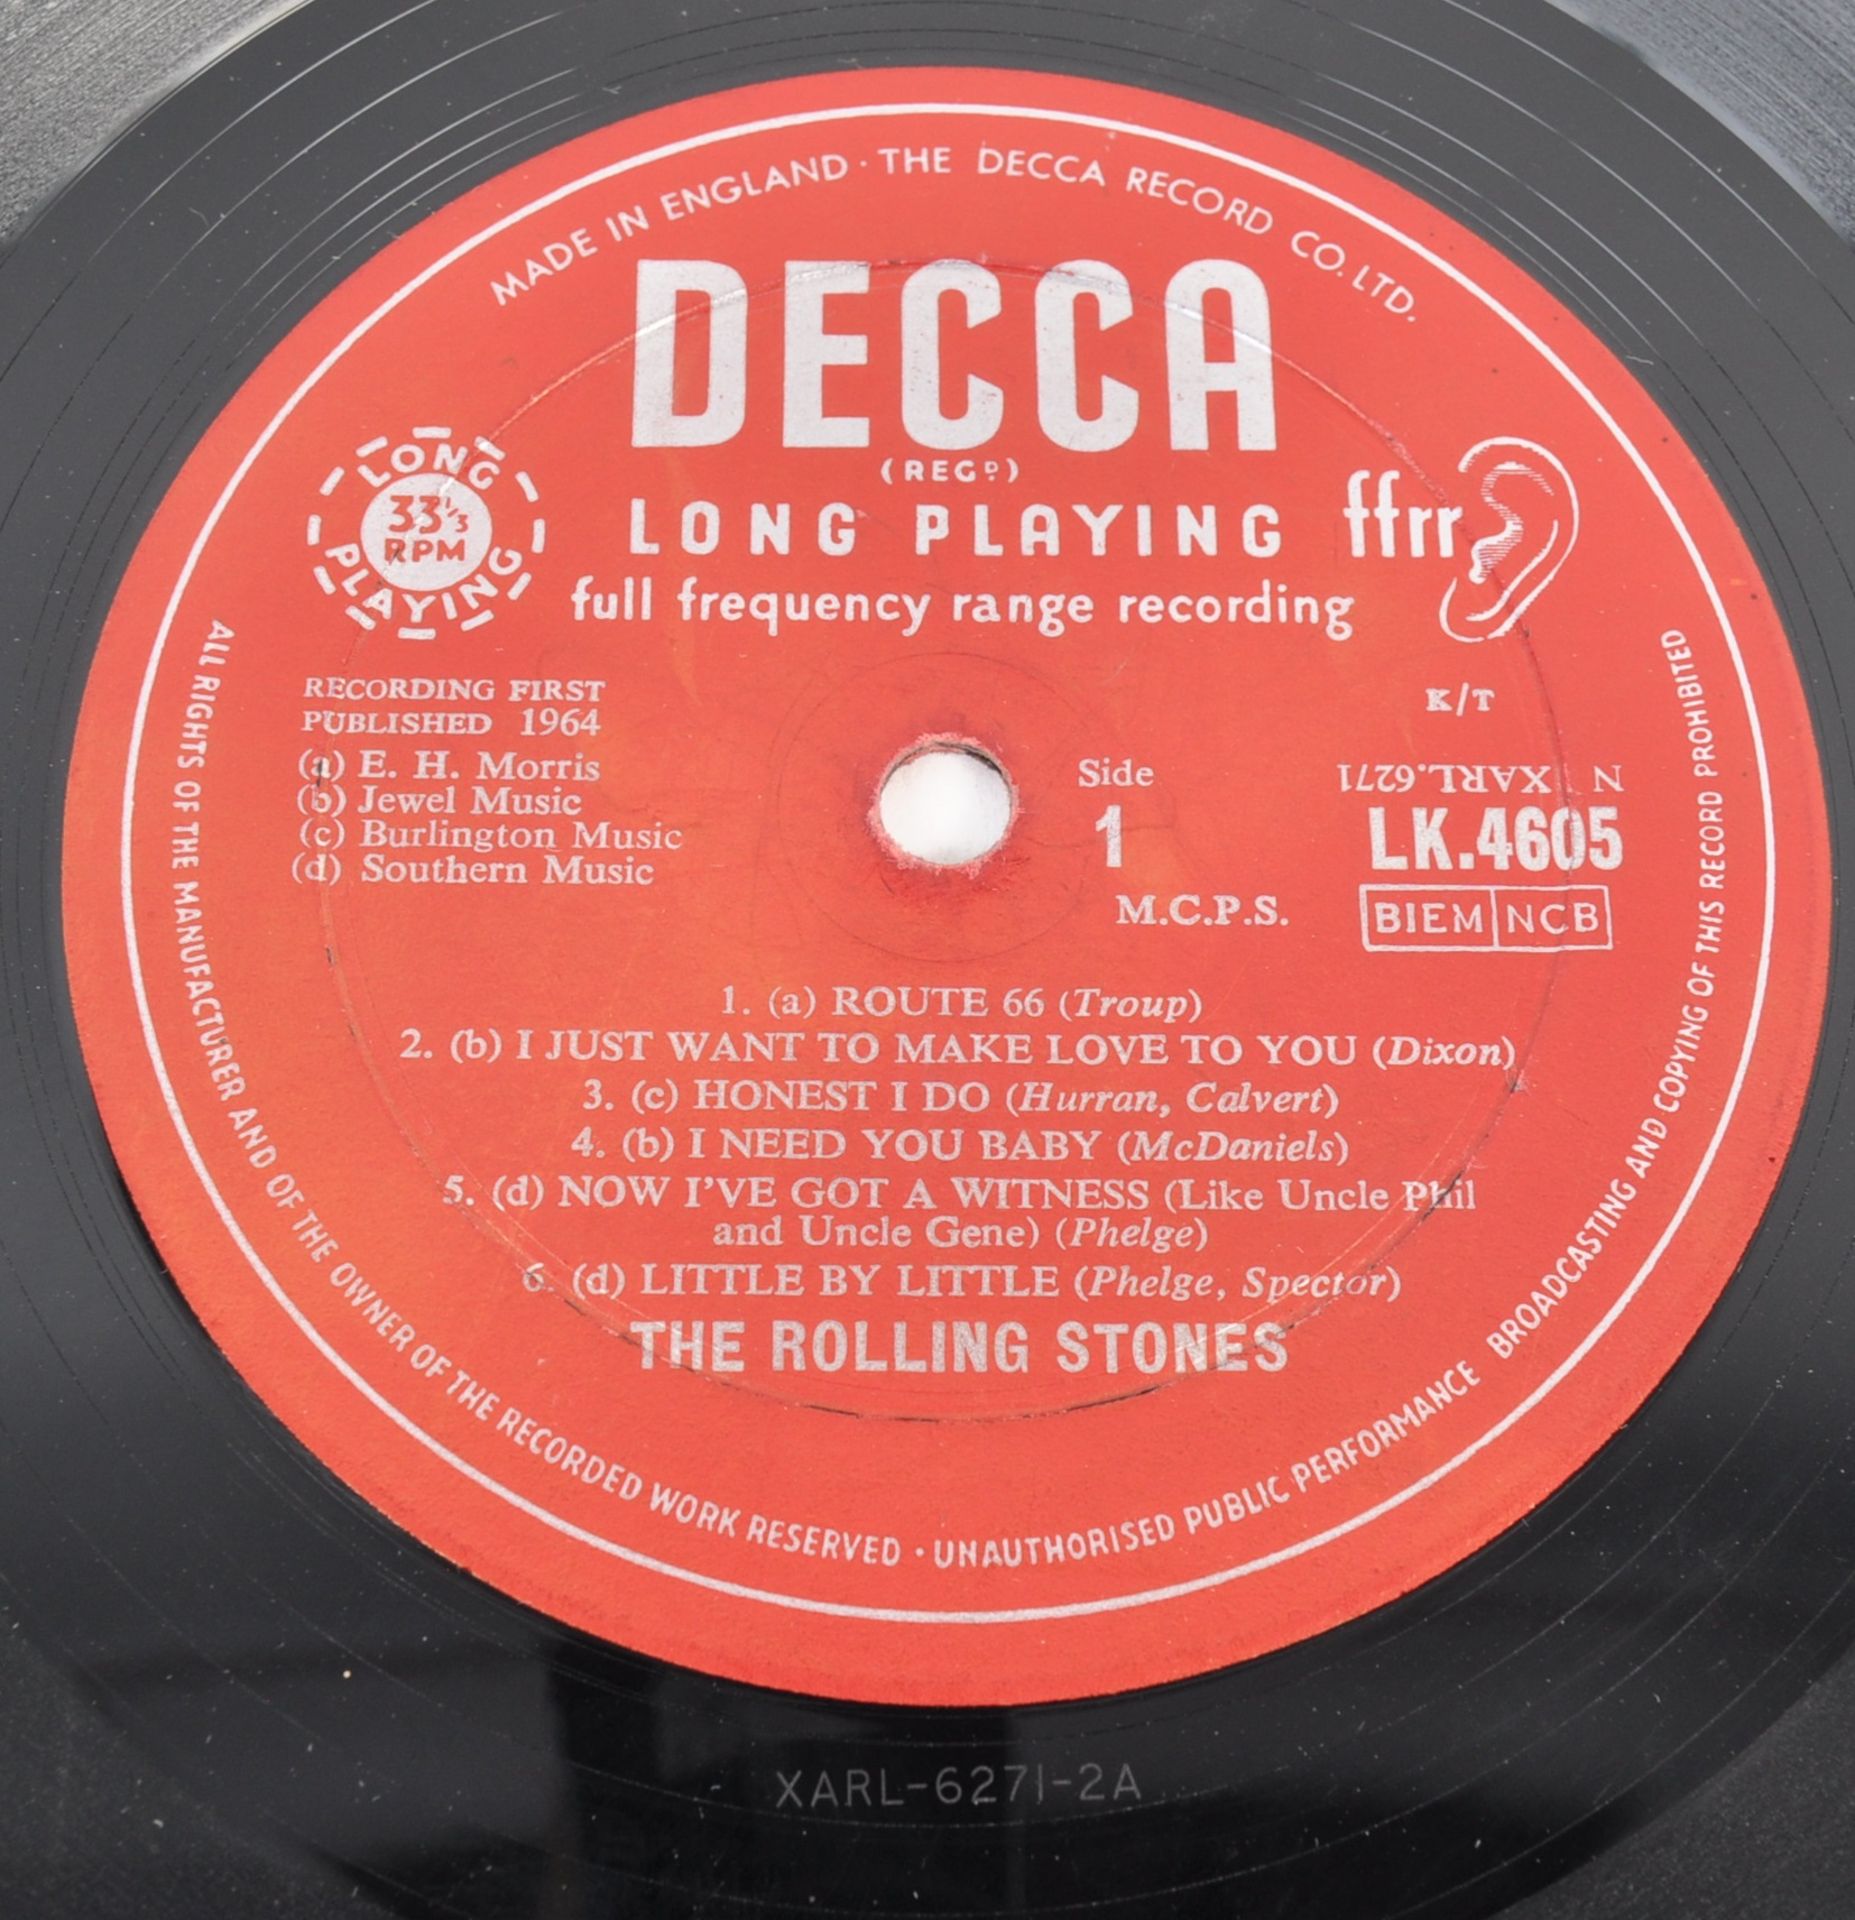 THE ROLLING STONES FIRST ALBUM - 1964 DECCA RELEASE - Image 2 of 3